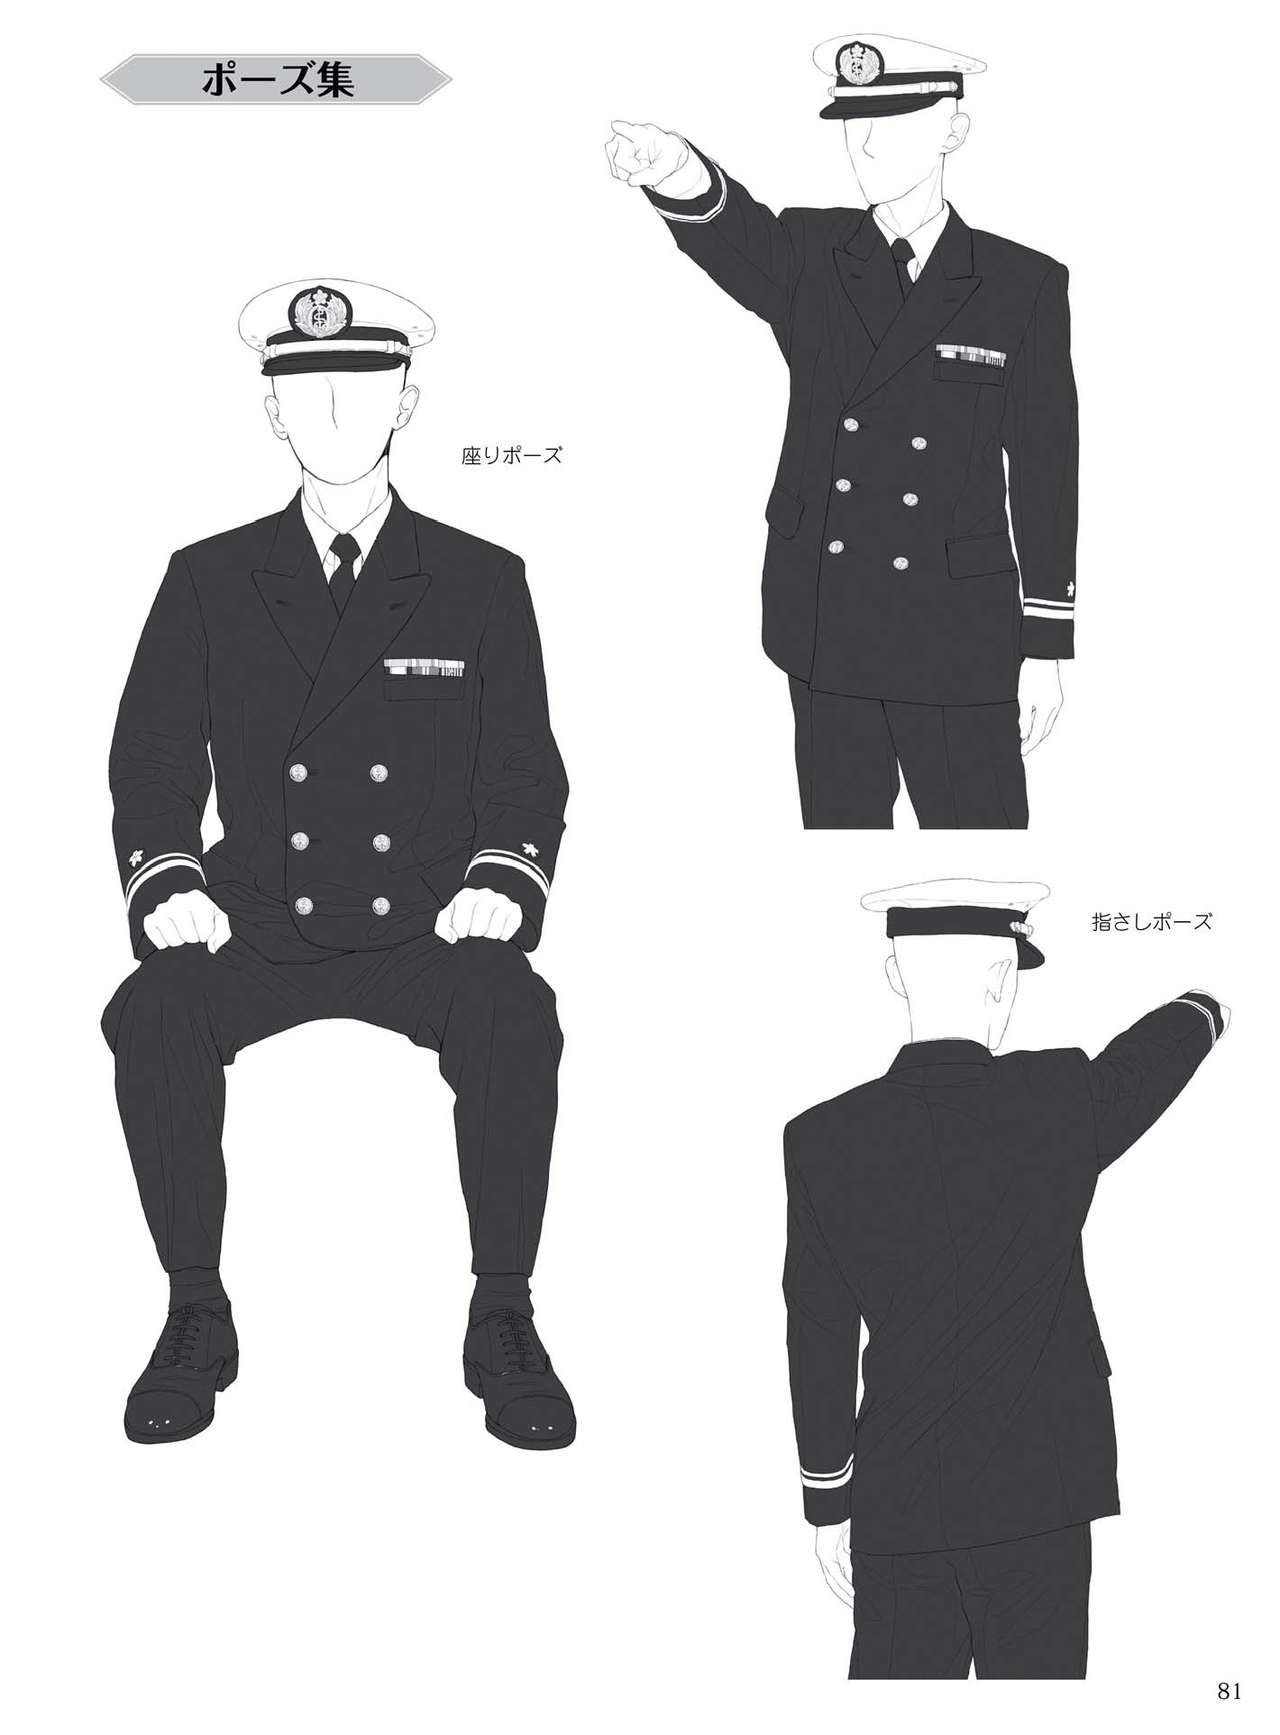 How to draw military uniforms and uniforms From Self-Defense Forces 軍服・制服の描き方 アメリカ軍・自衛隊の制服から戦闘服まで 84